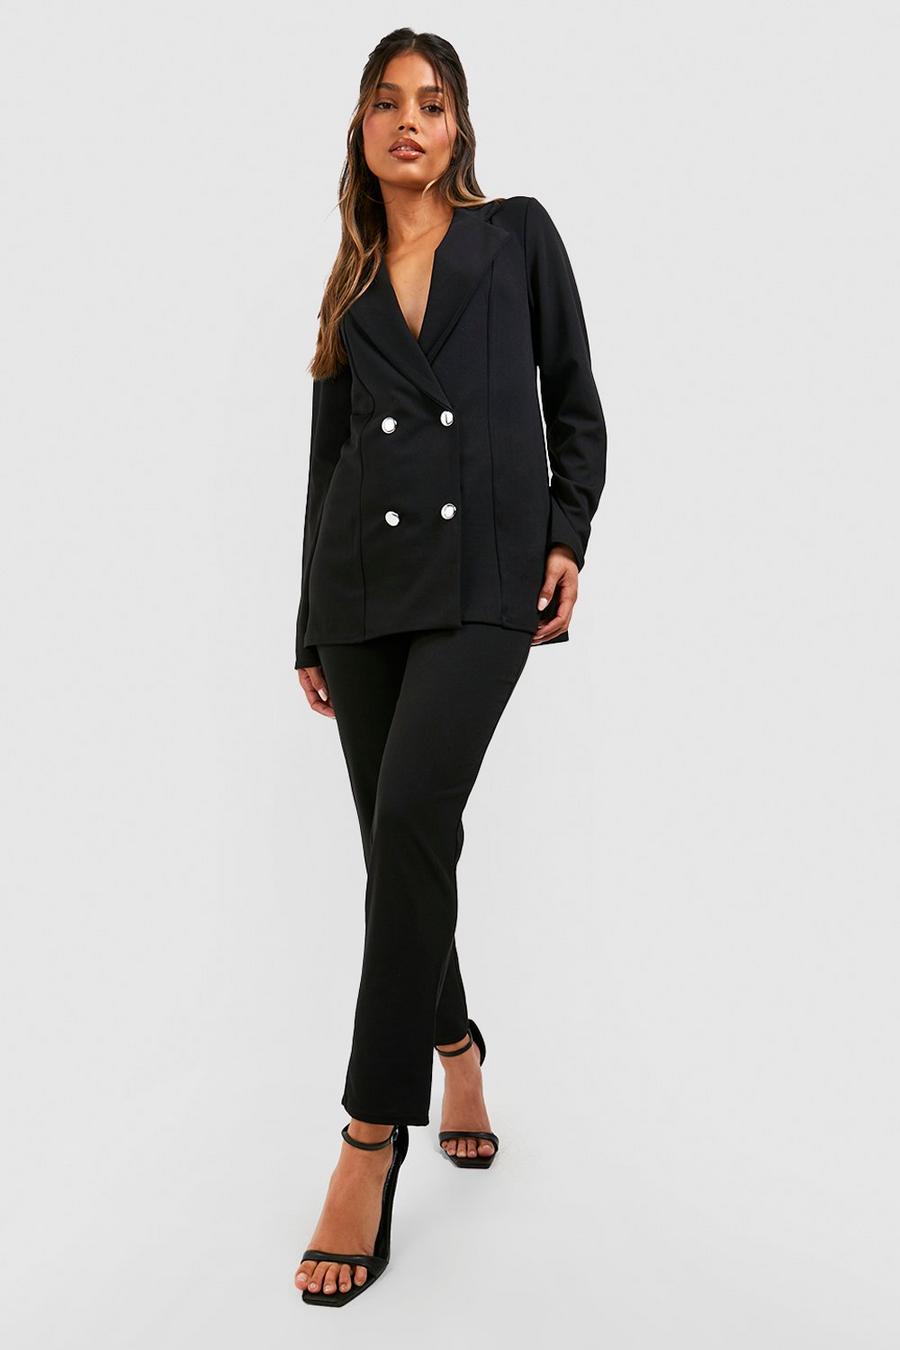 Black Jersey Knit Double Breasted Blazer And Pants Suit Set image number 1